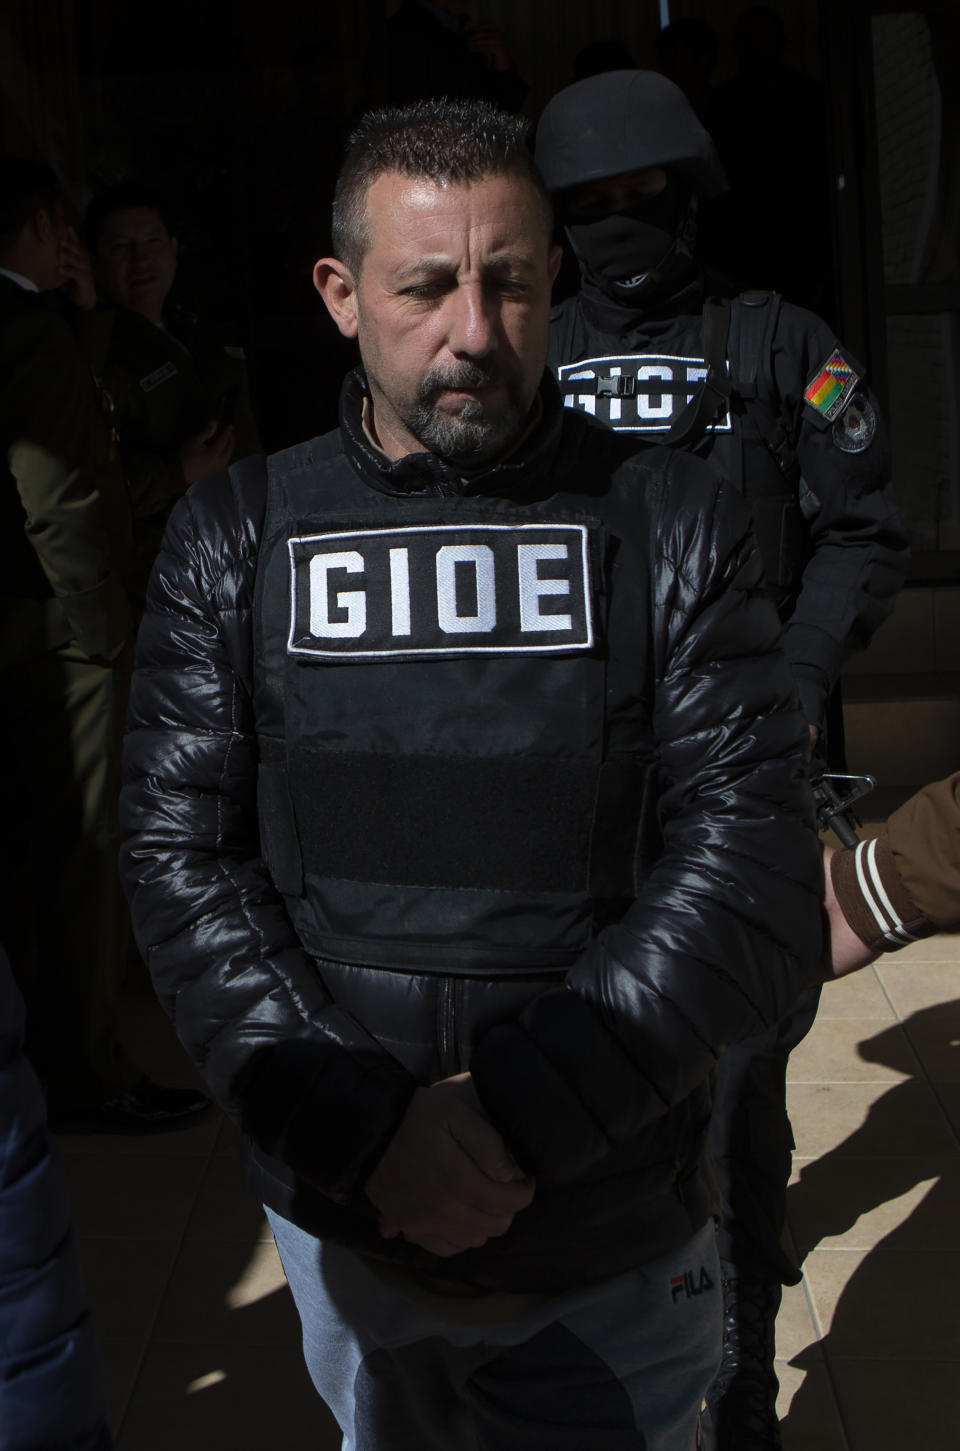 Alleged drug kingpin Paolo Lumia, wearing a bulletproof vest is escorted to a waiting vehicle by anti-drug officers, after a media presentation in La Paz, Bolivia, Thursday, July 4, 2019. Authorities in Bolivia arrested Lumia in the Bolivian city of Cochabamba on Wednesday night. There is an international arrest warrant out for the Italian citizen. (AP Photo/Juan Karita)